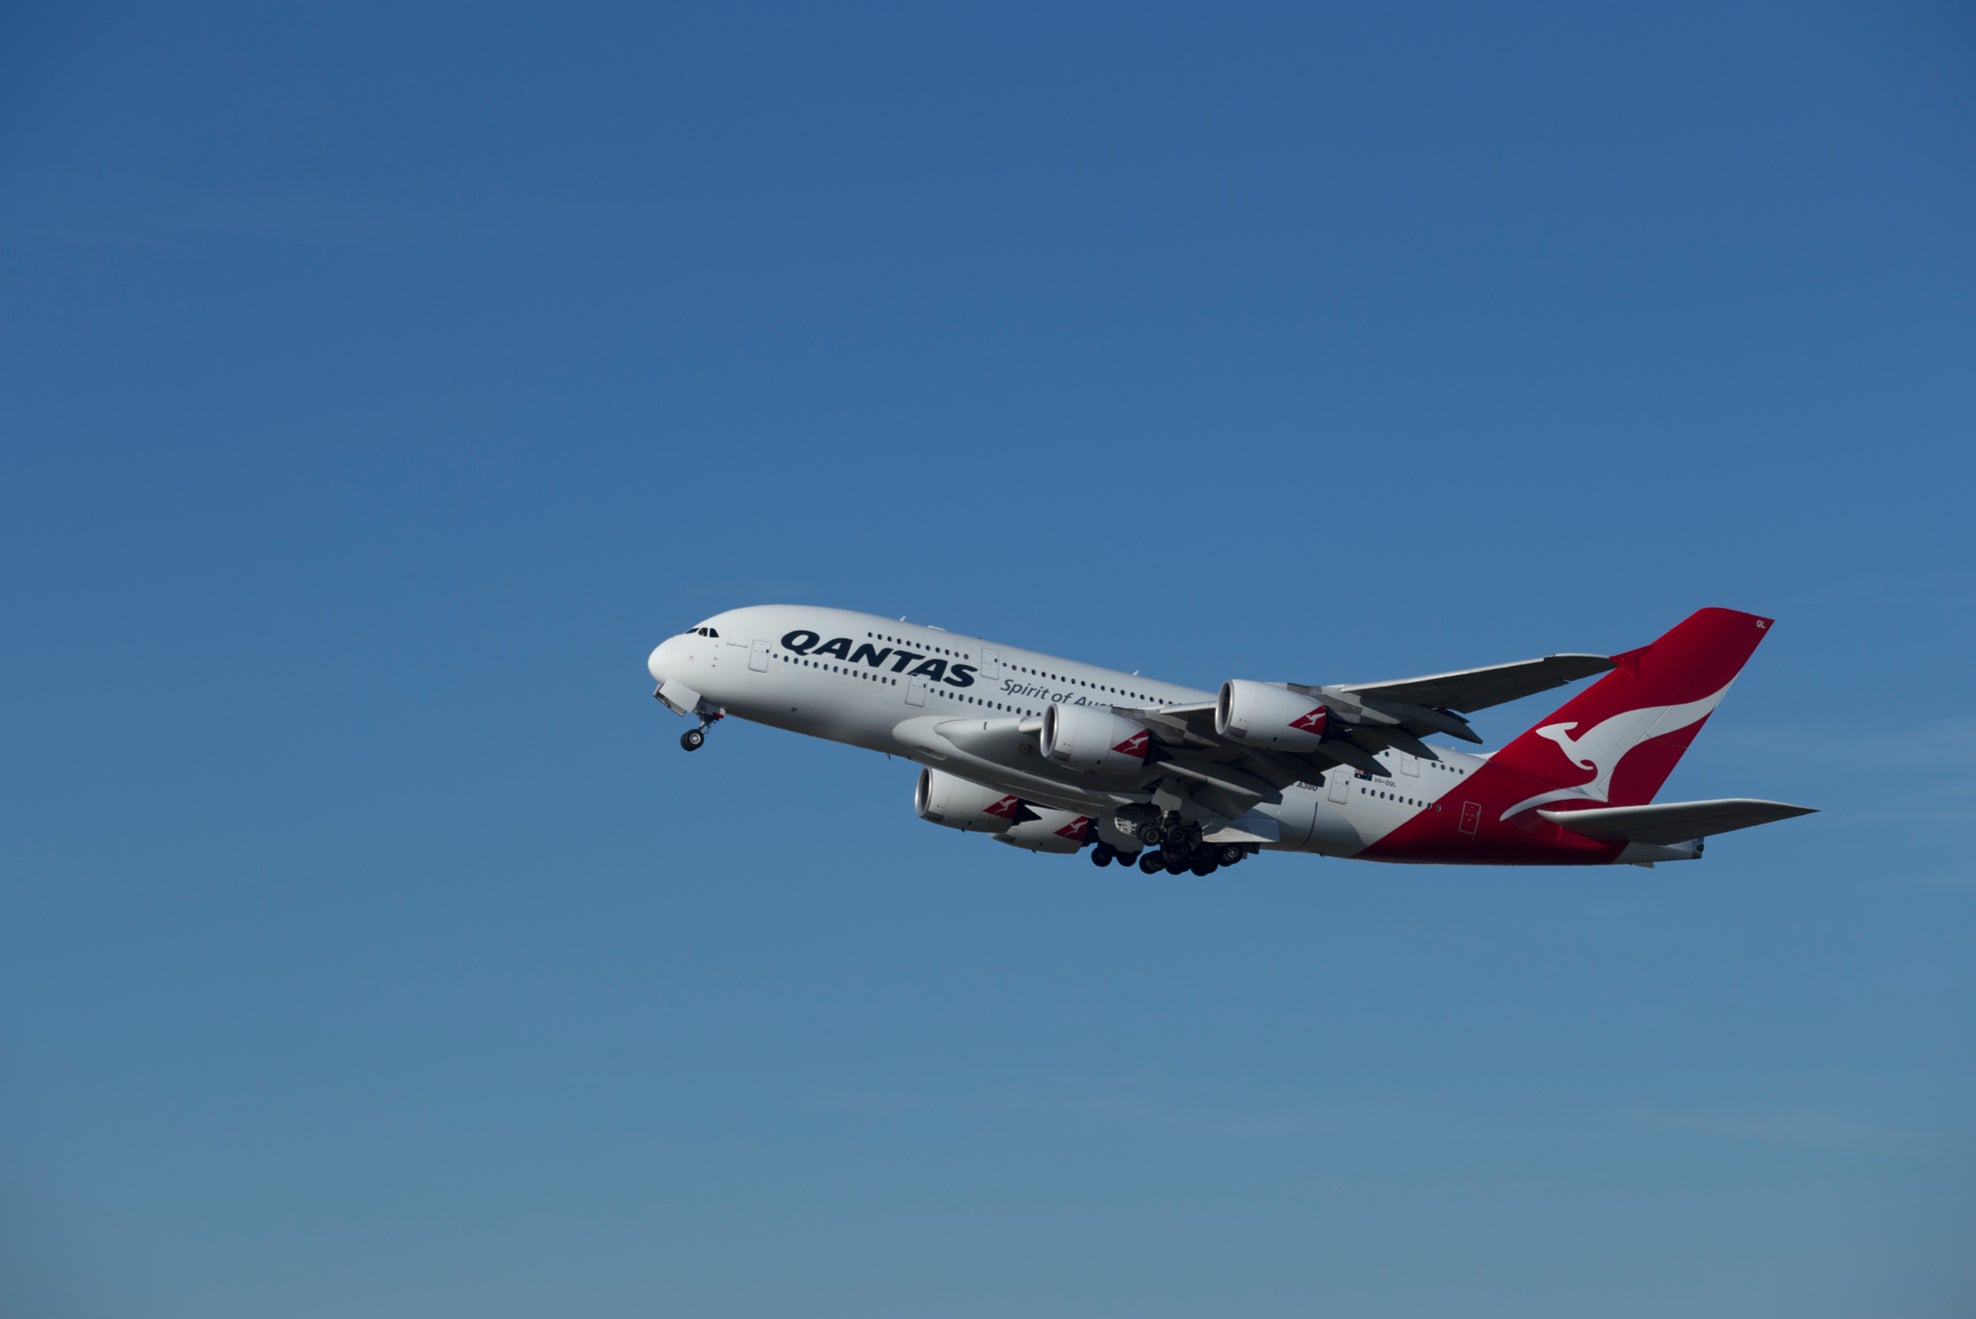 Qantas has said it is taking the allegations ‘seriously’